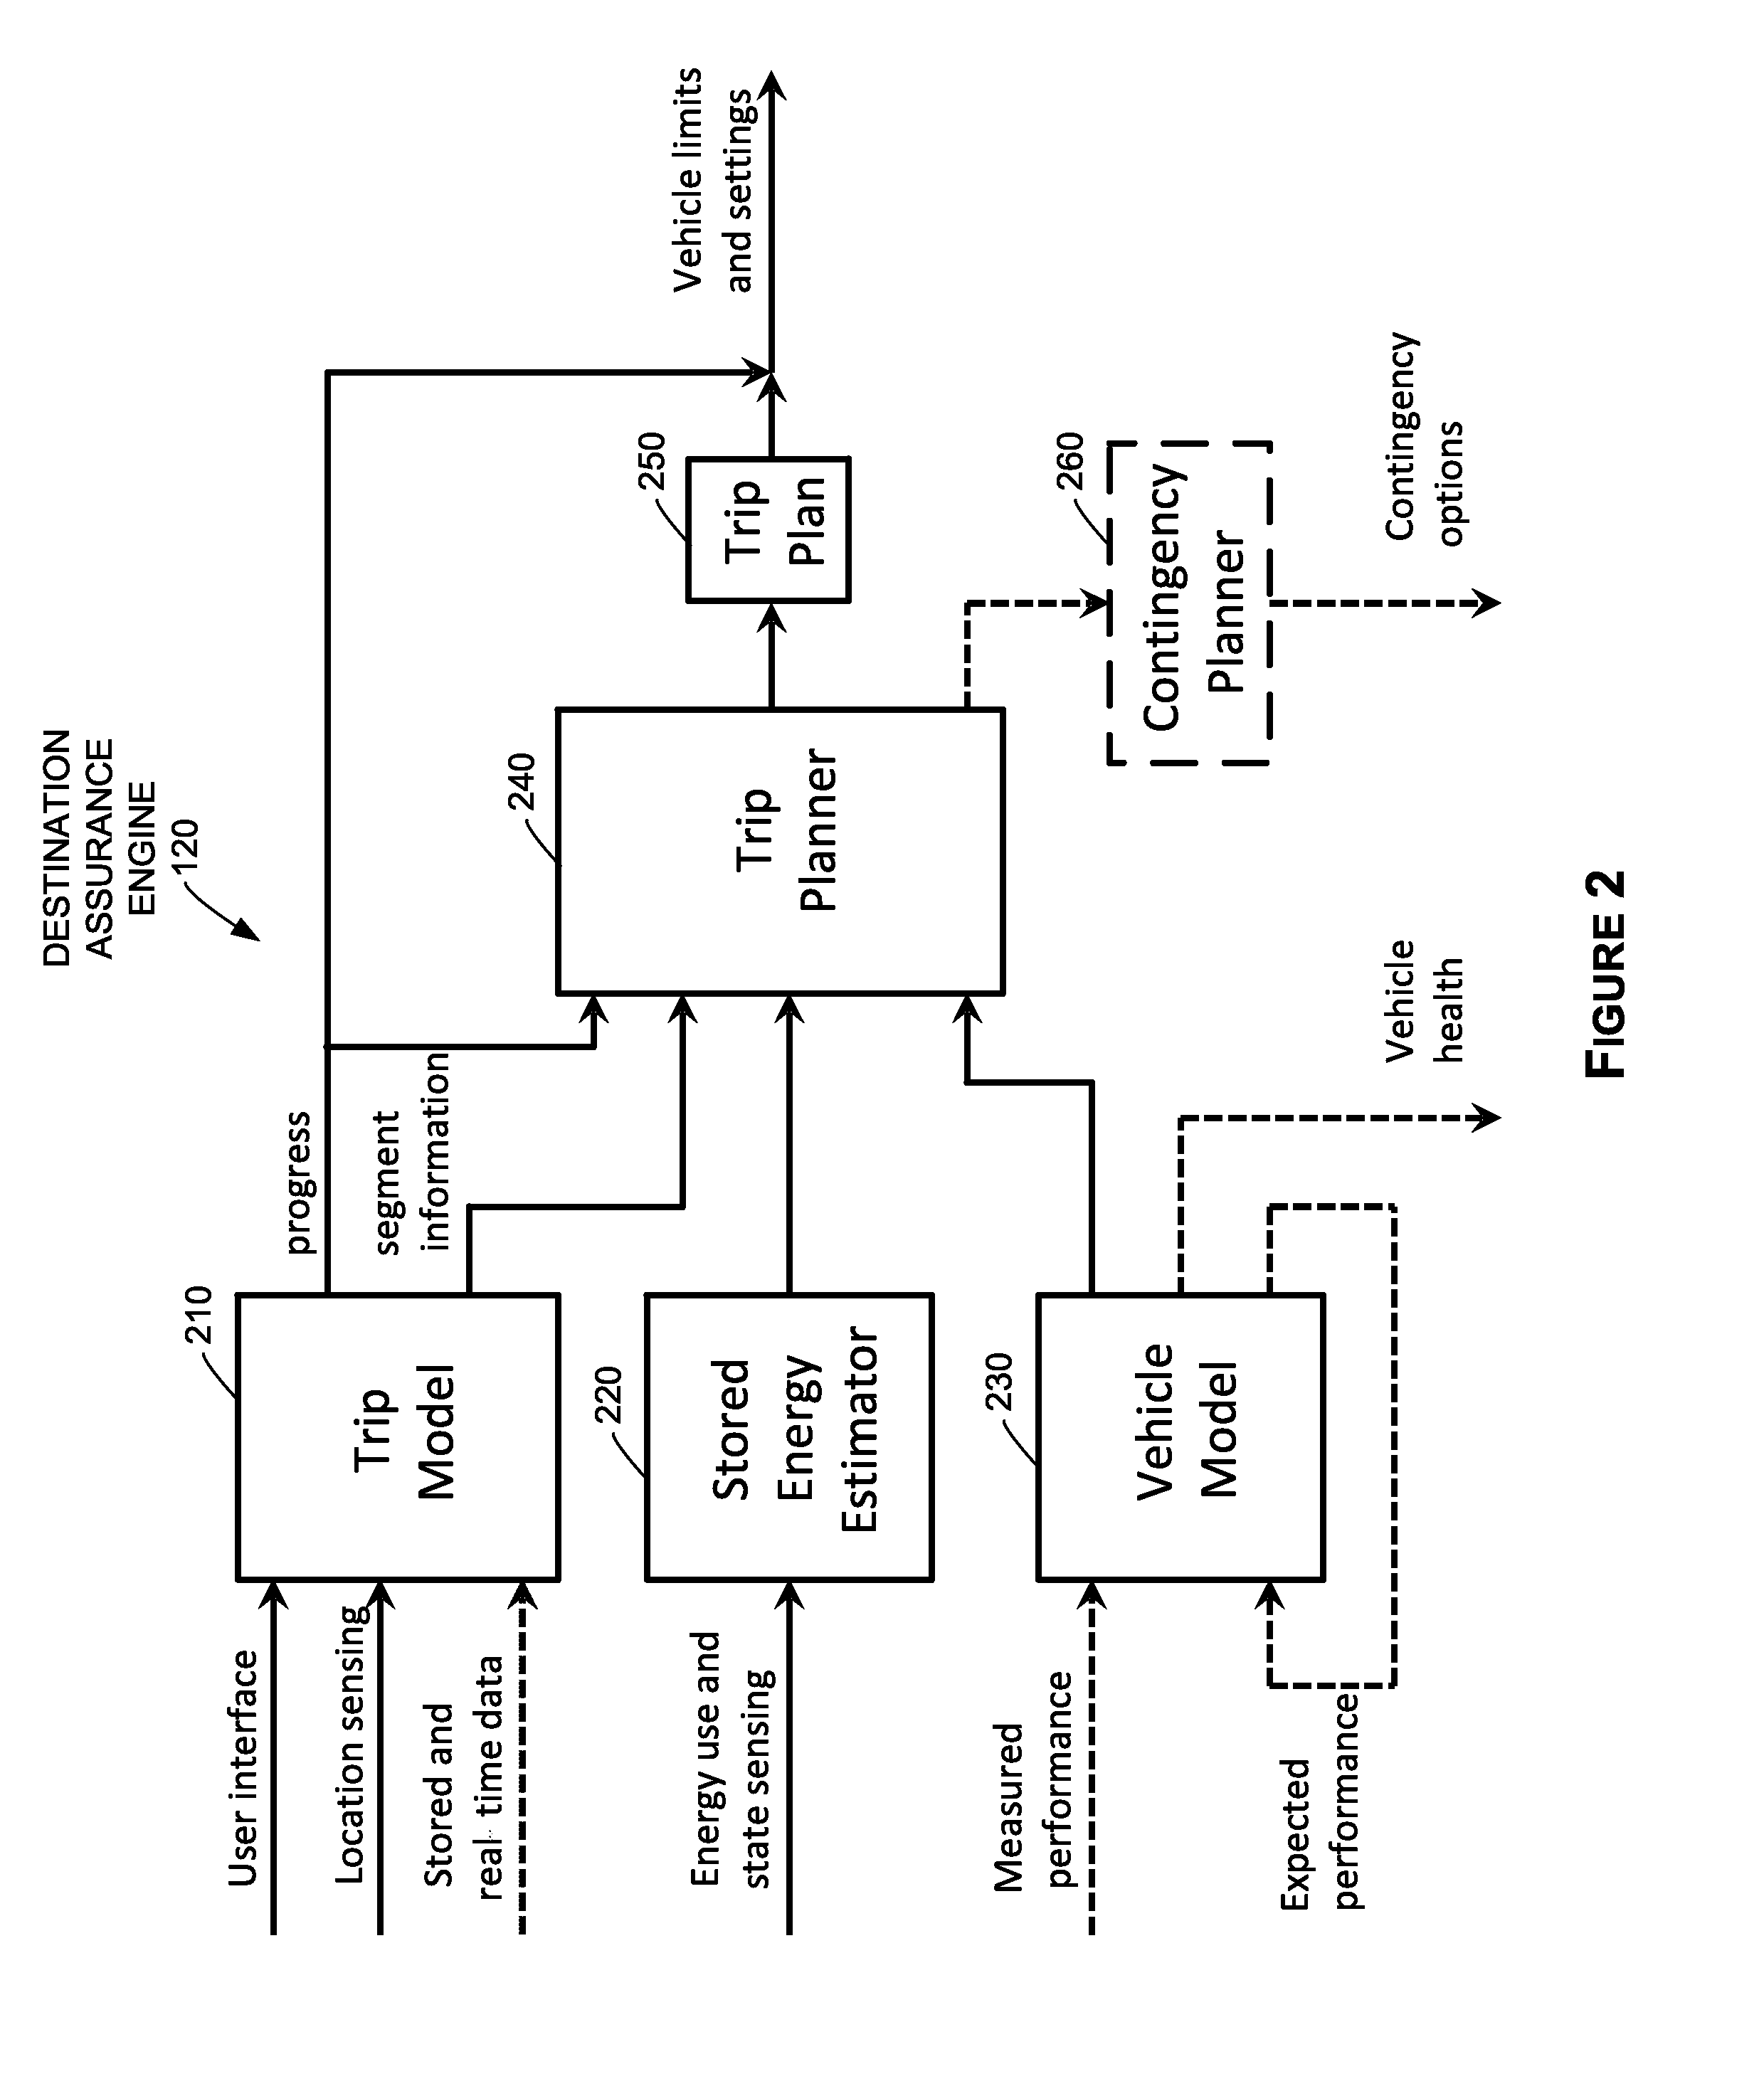 Vehicle control system and methods